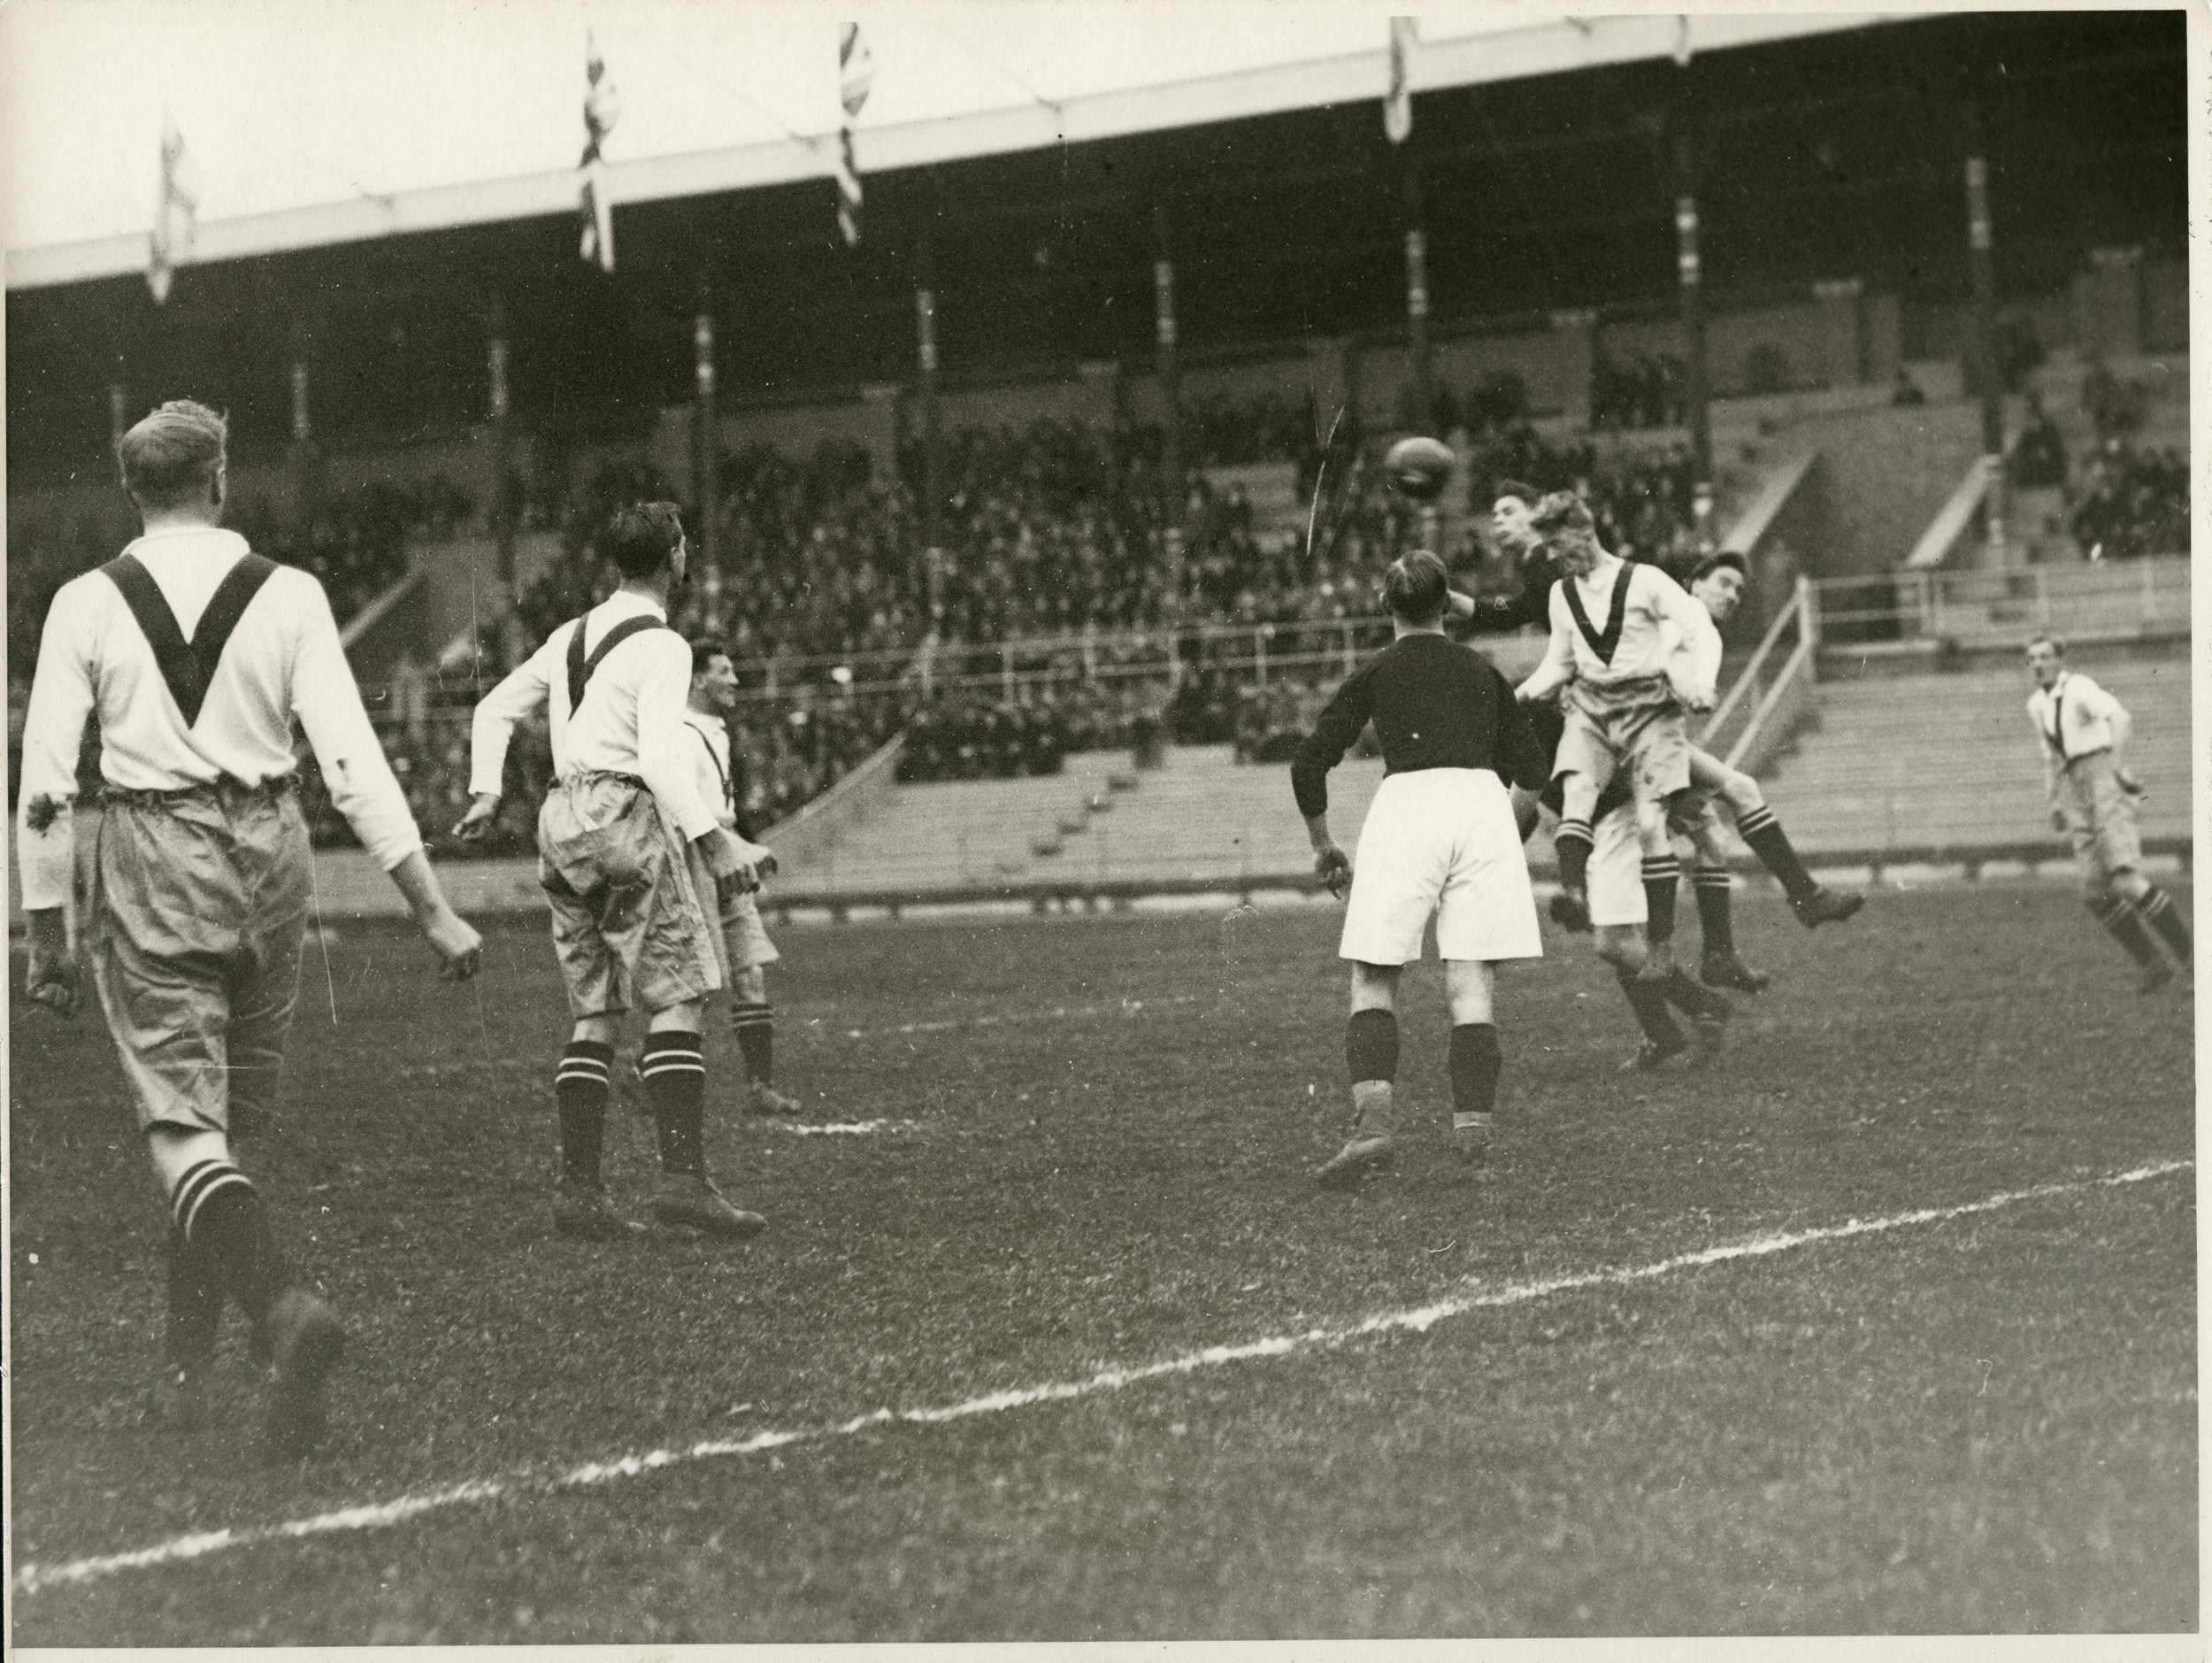 Tuesday 26 May 1925  AIK - Airdrieonians FC 0-5 (0-2)  Stockholms stadion, Stockholm